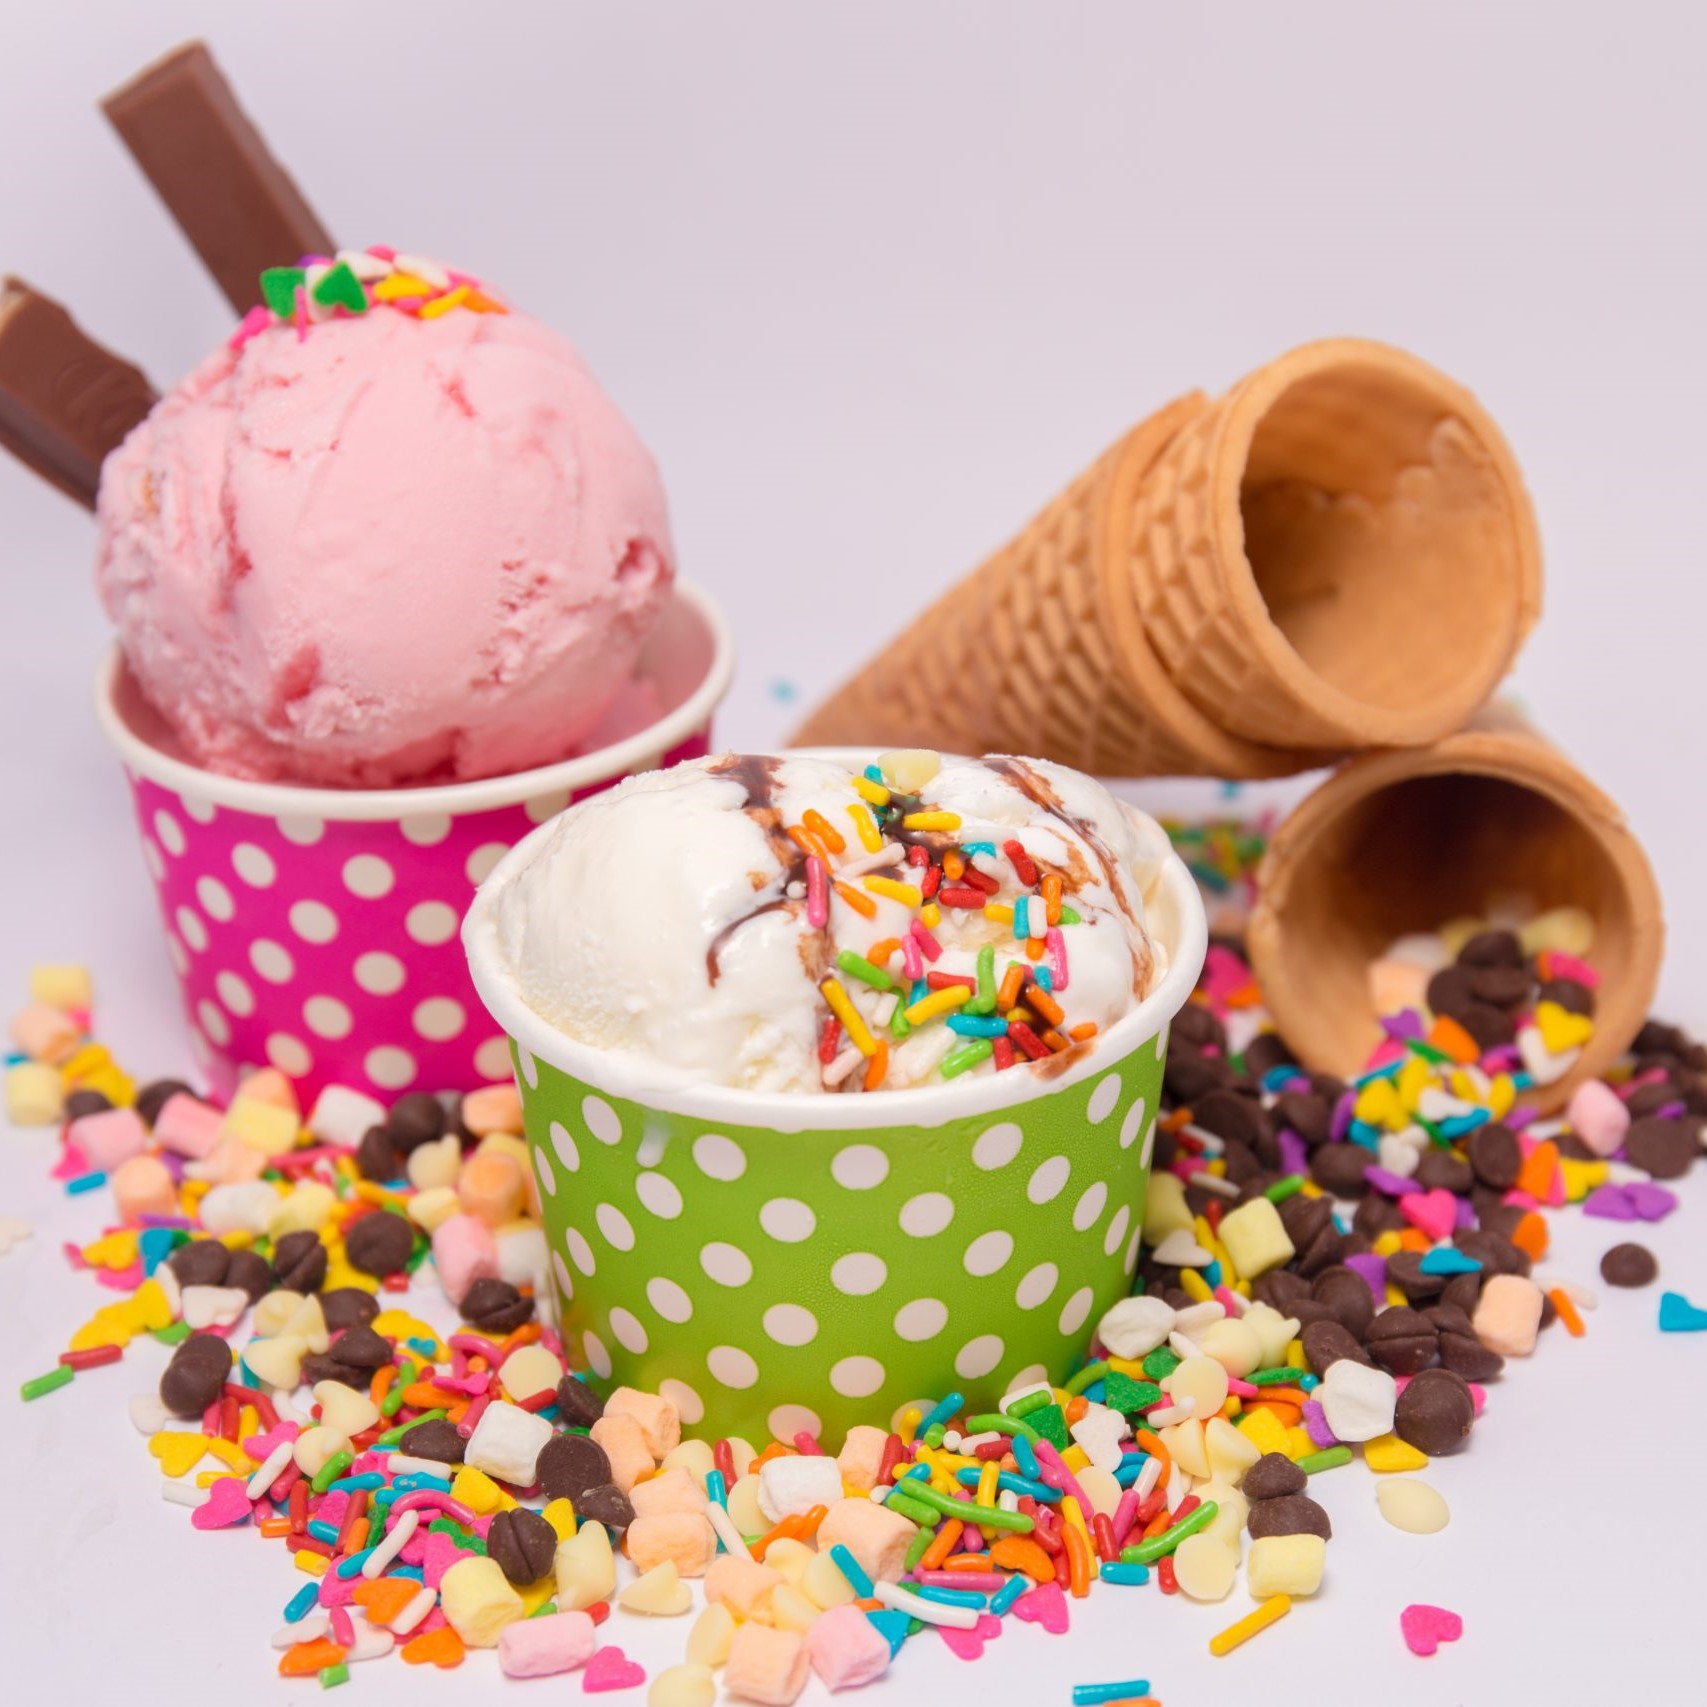 Two icecream cups, with cones and toppings scattered around